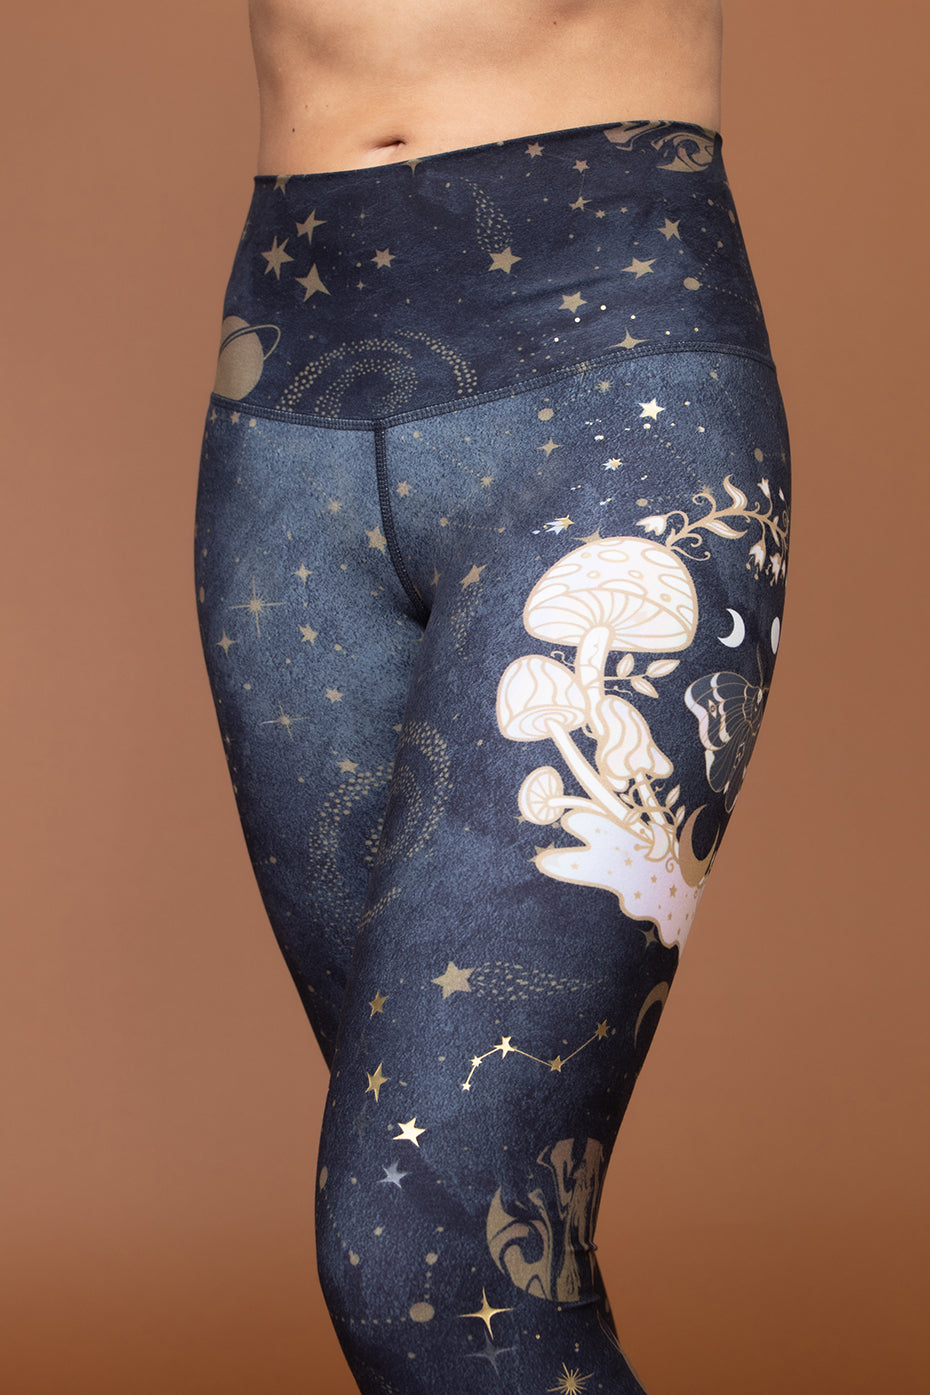 Shroom Galaxy Barefoot Legging with Foil Accents